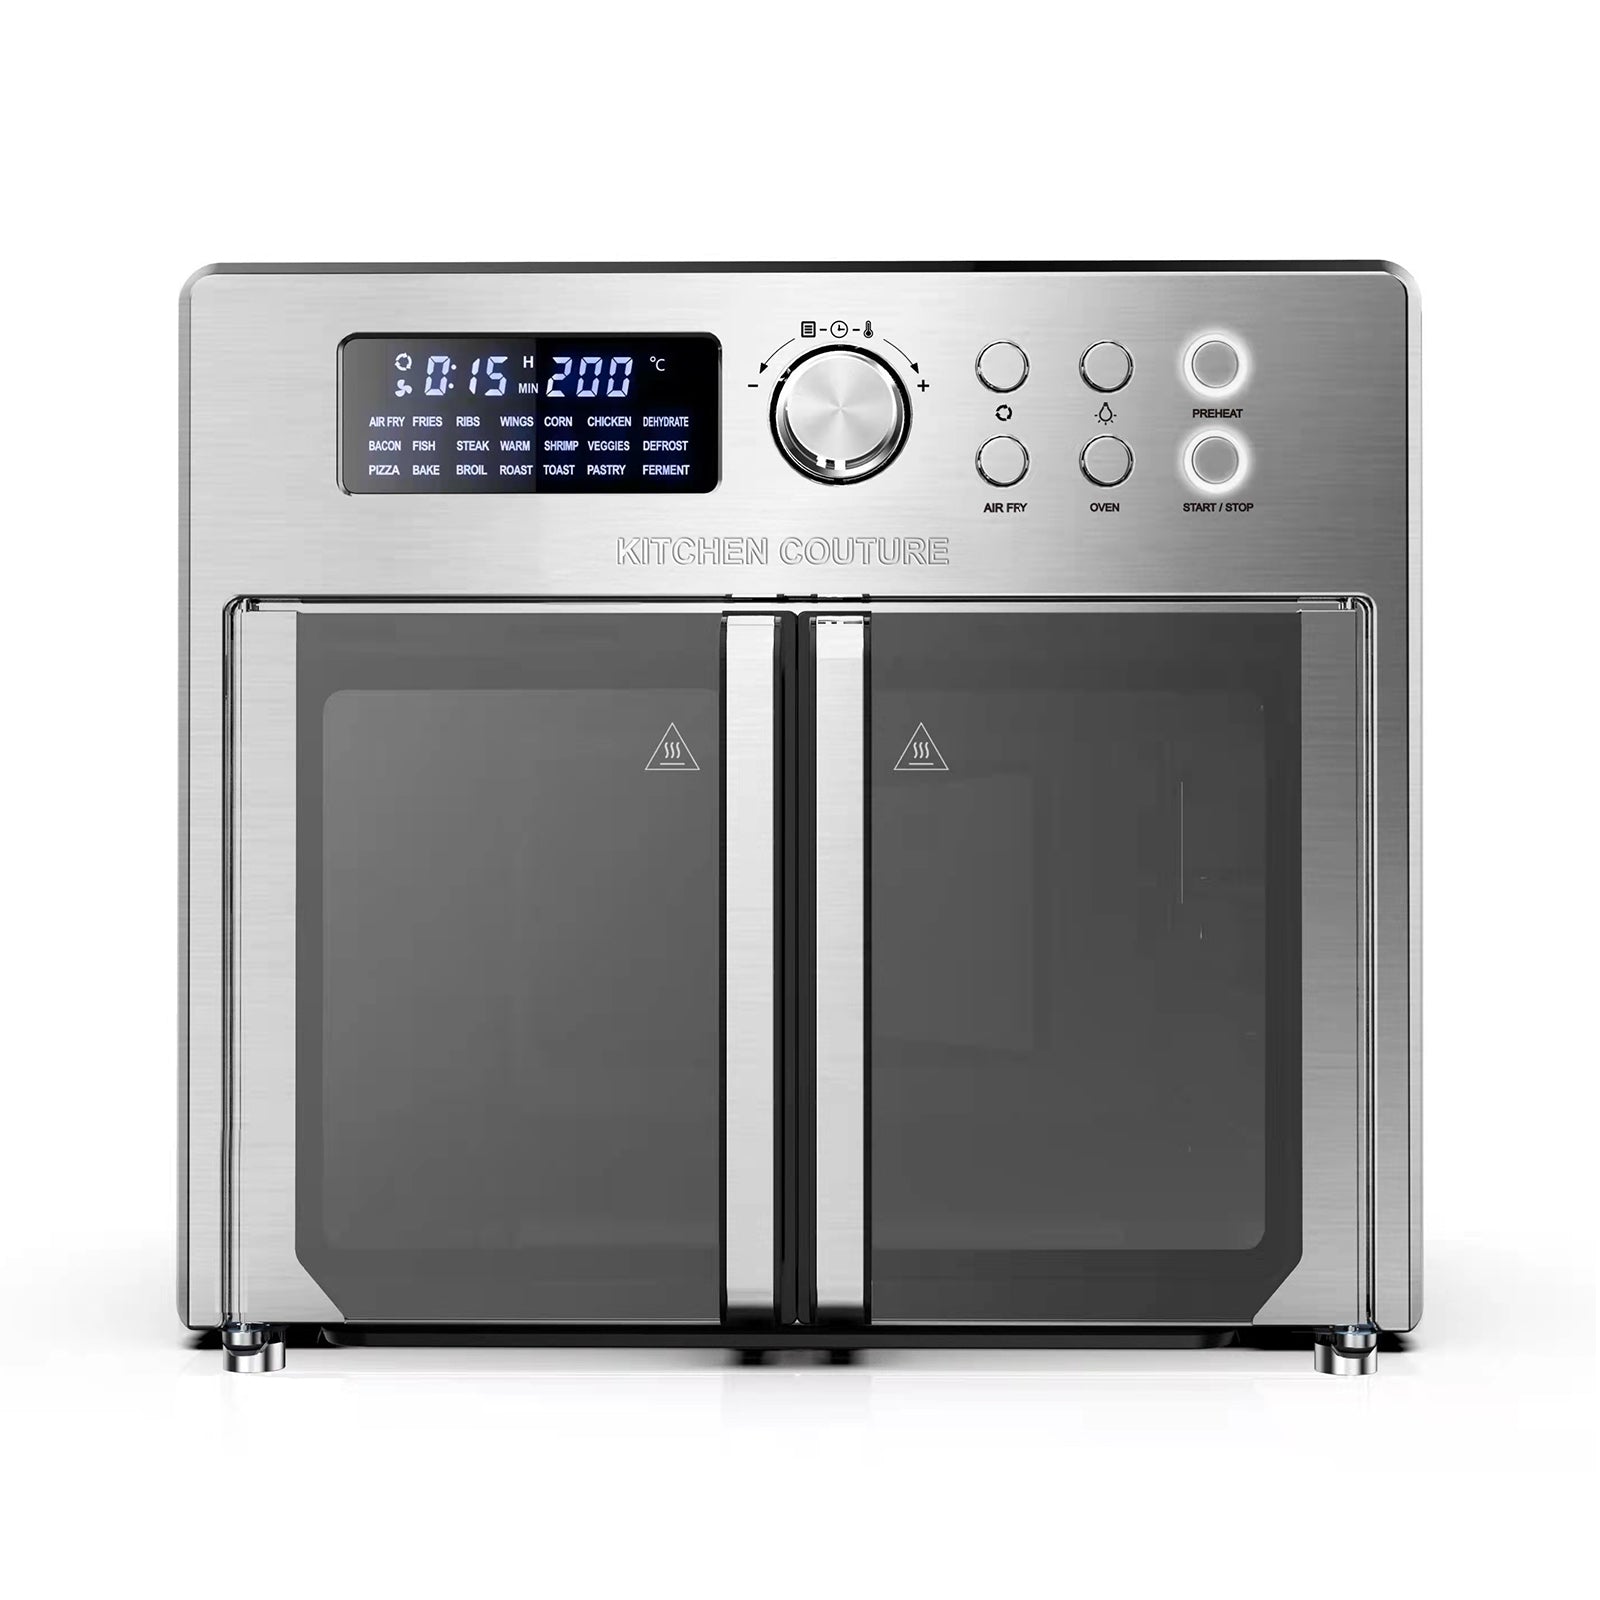 Kitchen Couture 25 Litre Air Fryer Oven French Door Stainless Steel 22 Presets